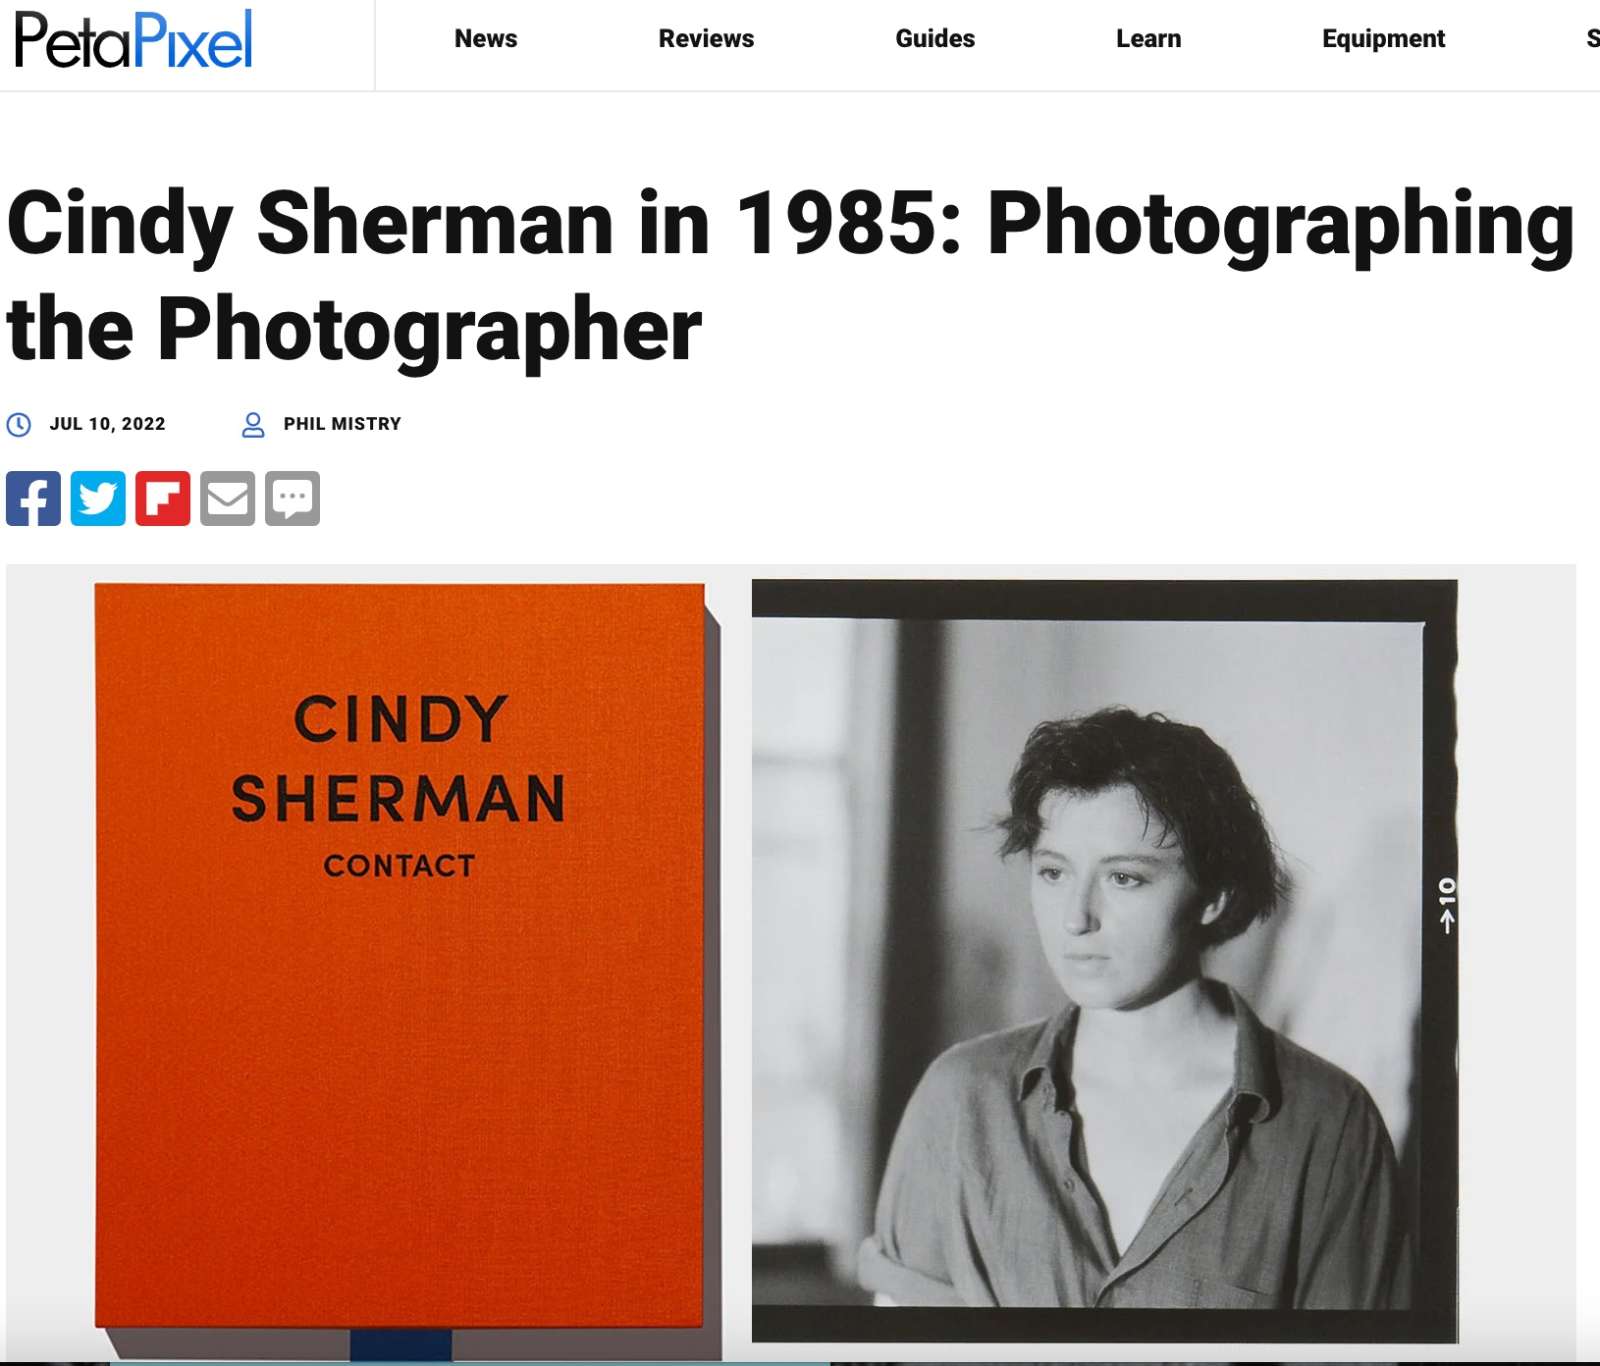 Cindy Sherman in 1985: Photographing the Photographer